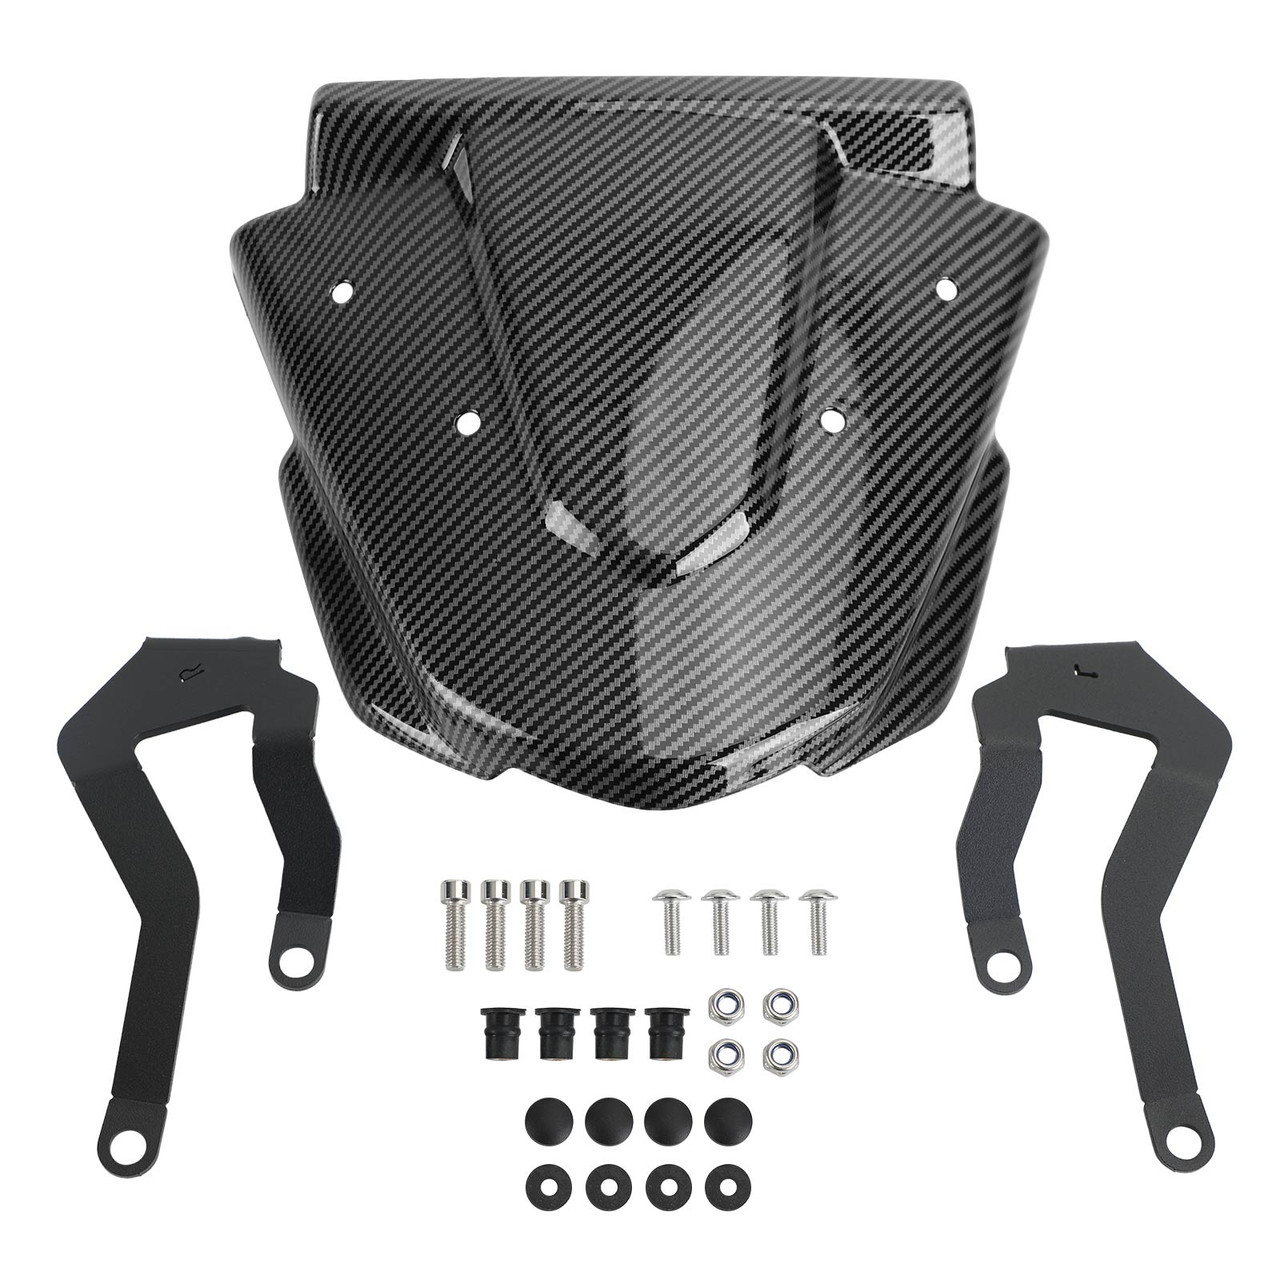 Mudguard Extension Cover Front Beak Nose Cone Fit For Yamaha XT1200Z 2014-2021 CBN